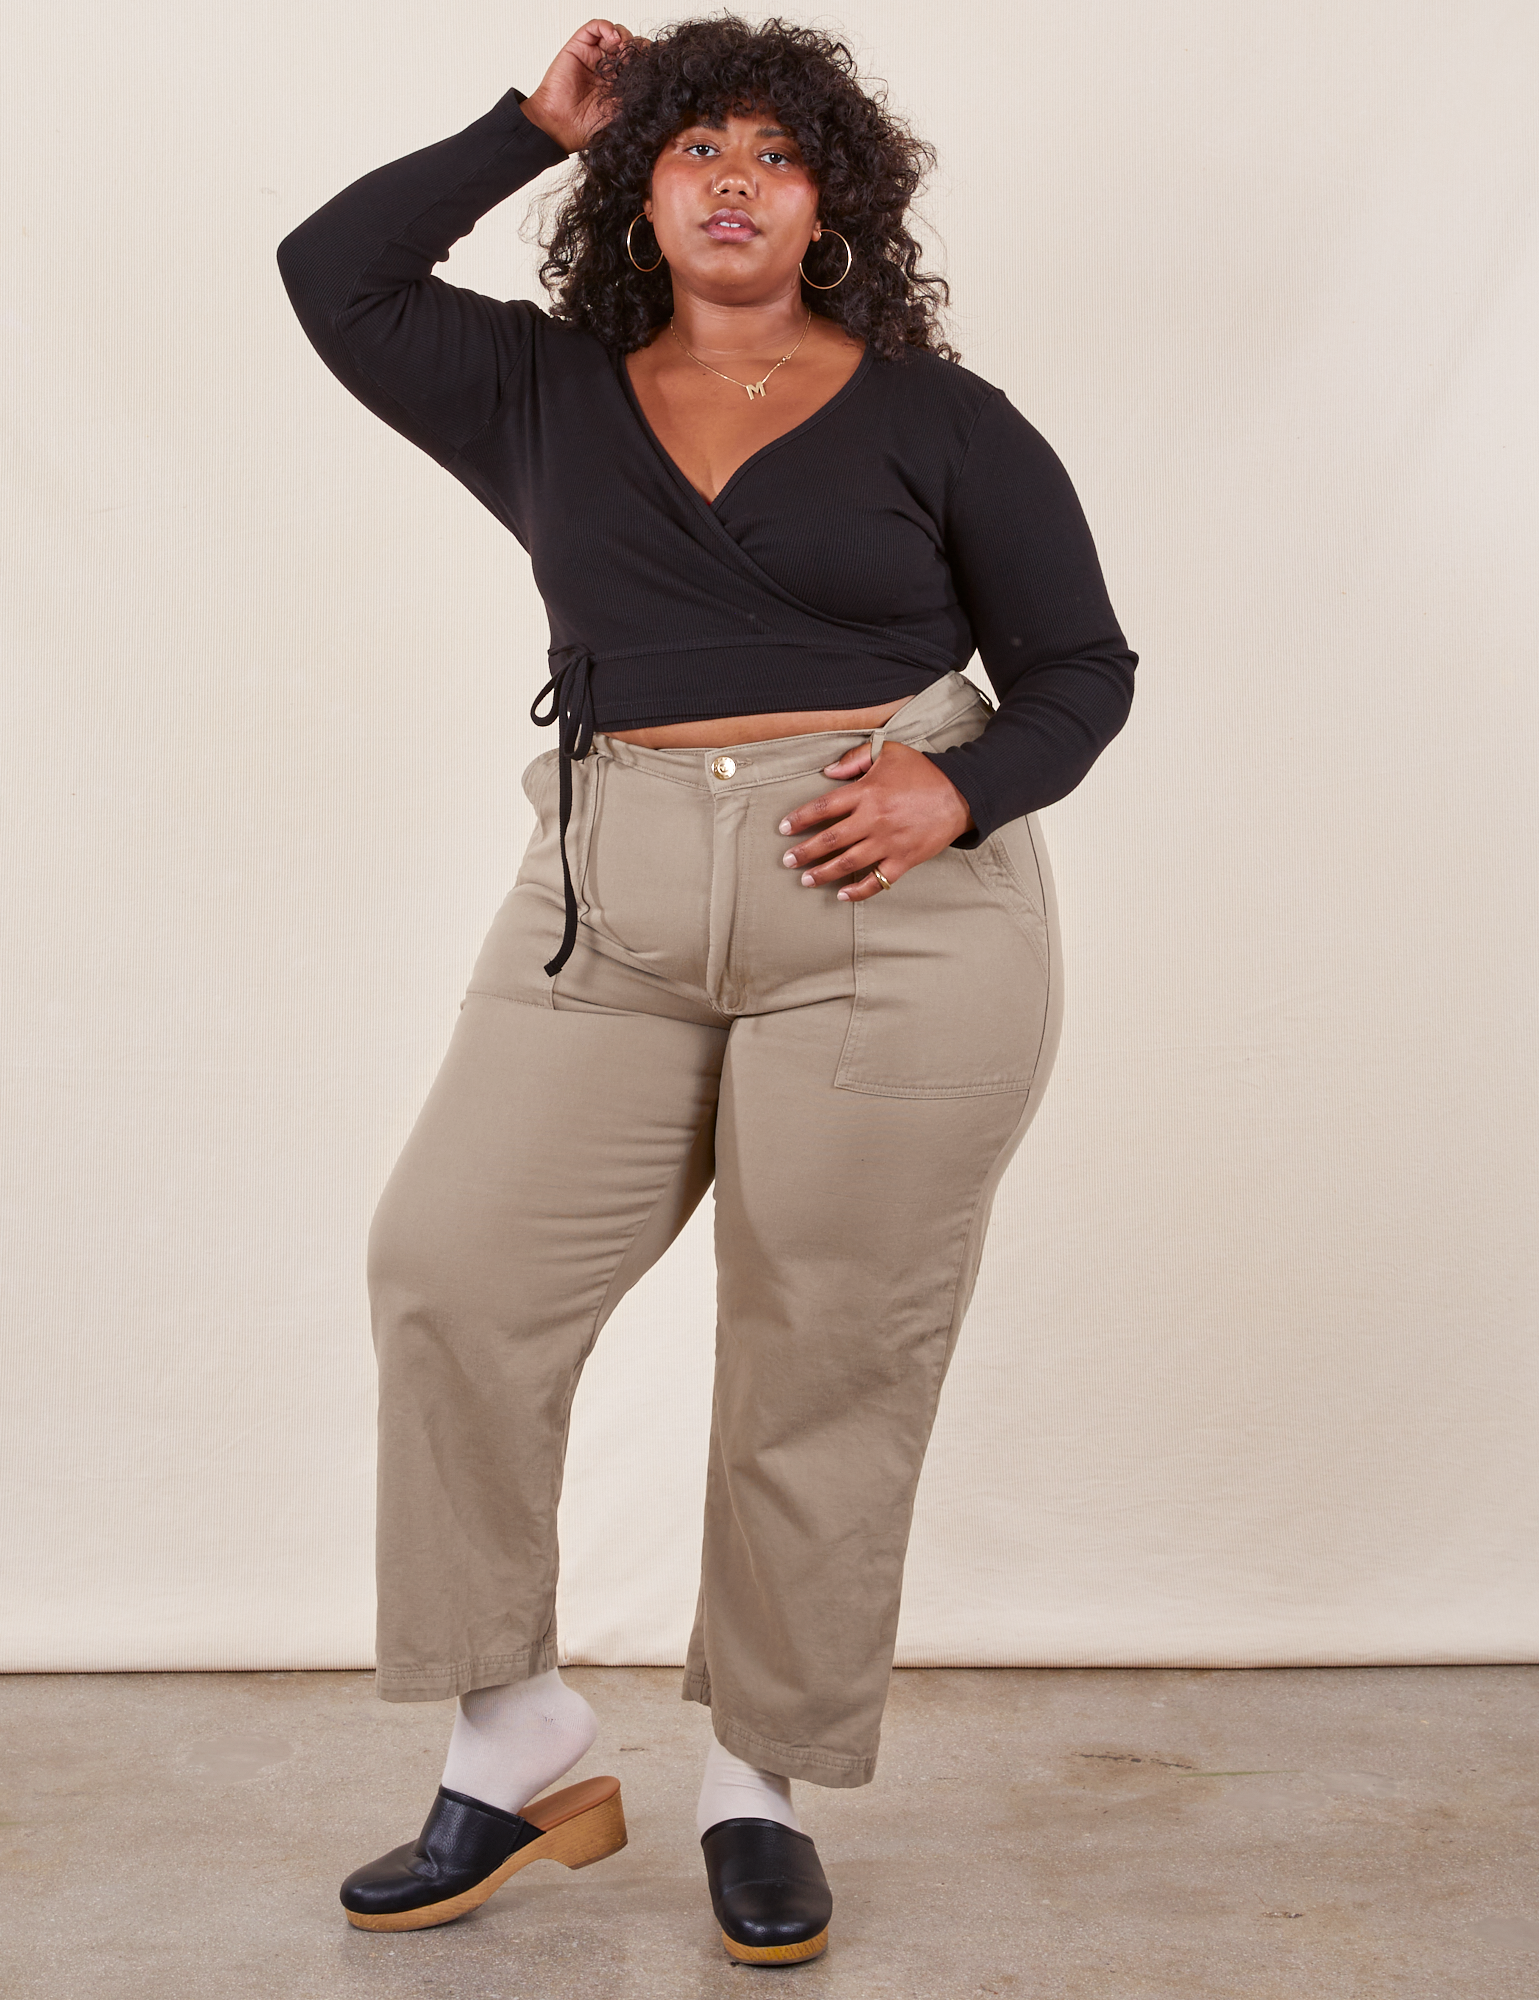 Morgan is 5&#39;5&quot; and wearing Petite 1XL Work Pants in Khaki Grey paired with black Wrap Top